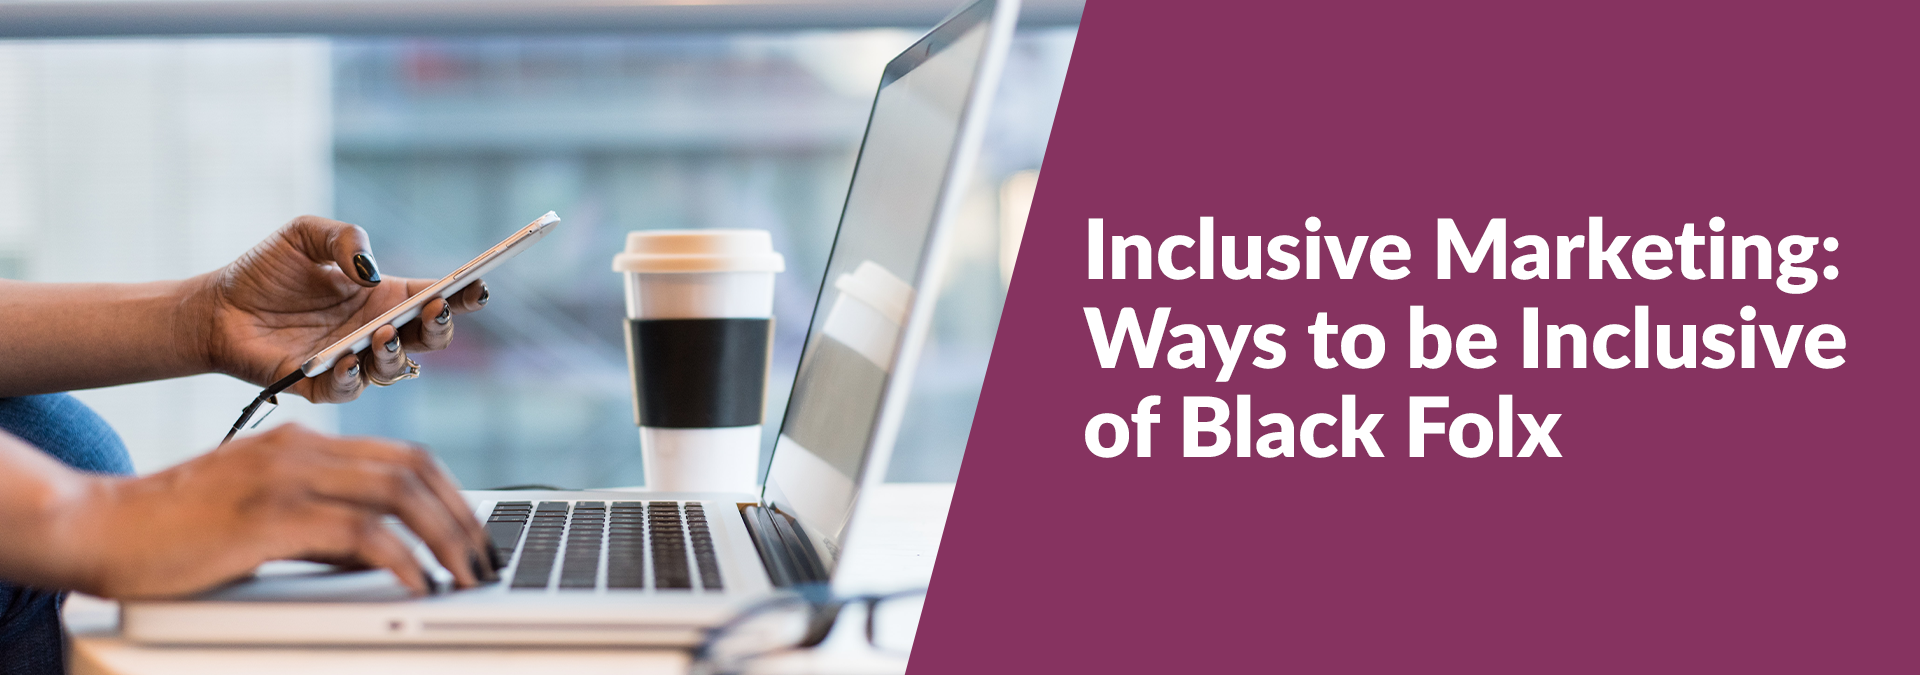 Image of Black person using a phone and laptop with the headline Inclusive Marketing: Ways to Be Inclusive of Black Folx